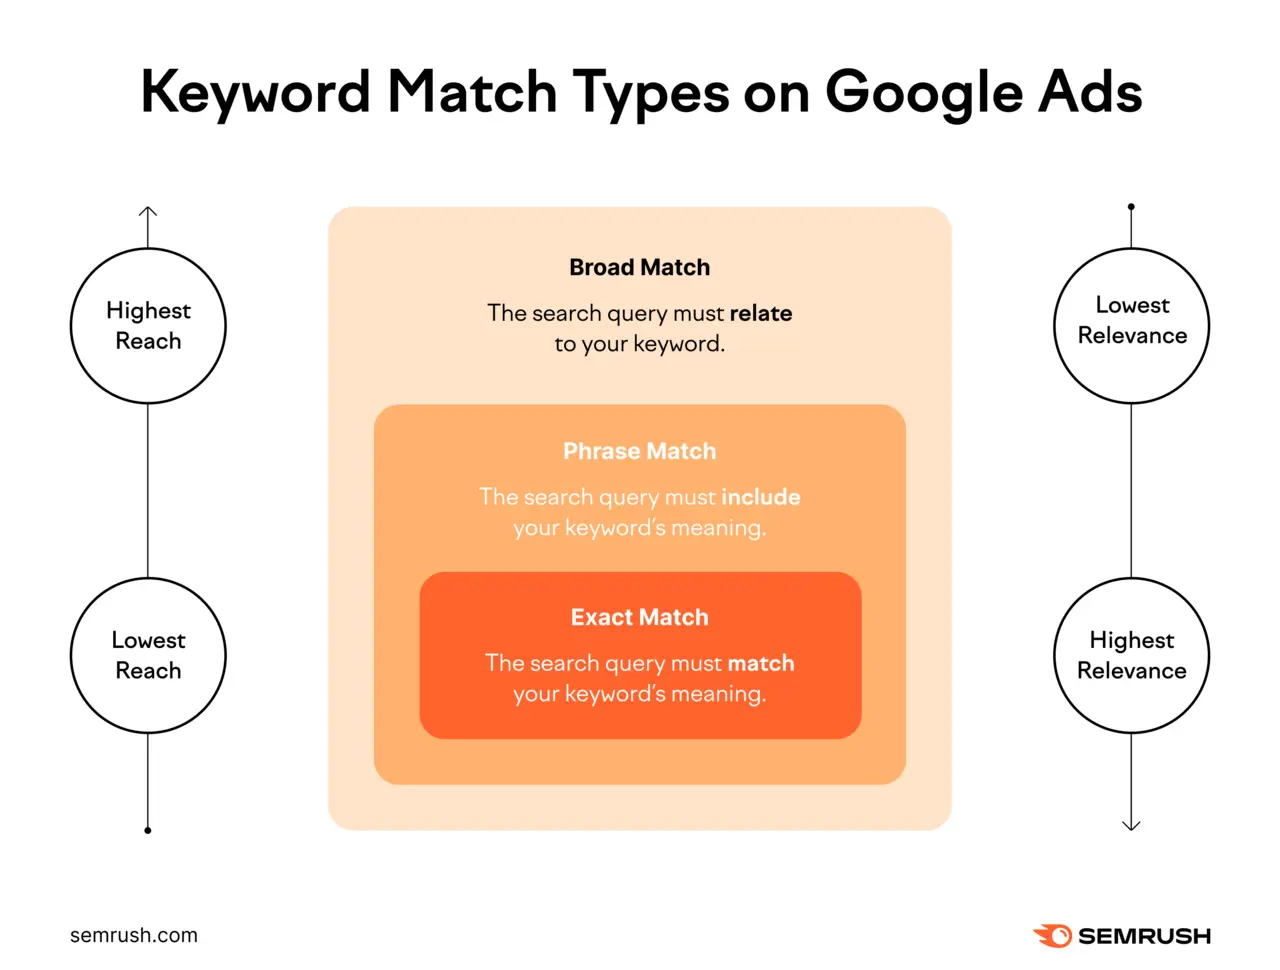 A gradient of peach to orange rectangles showing three types of Keyword Match Types on Google Ads.